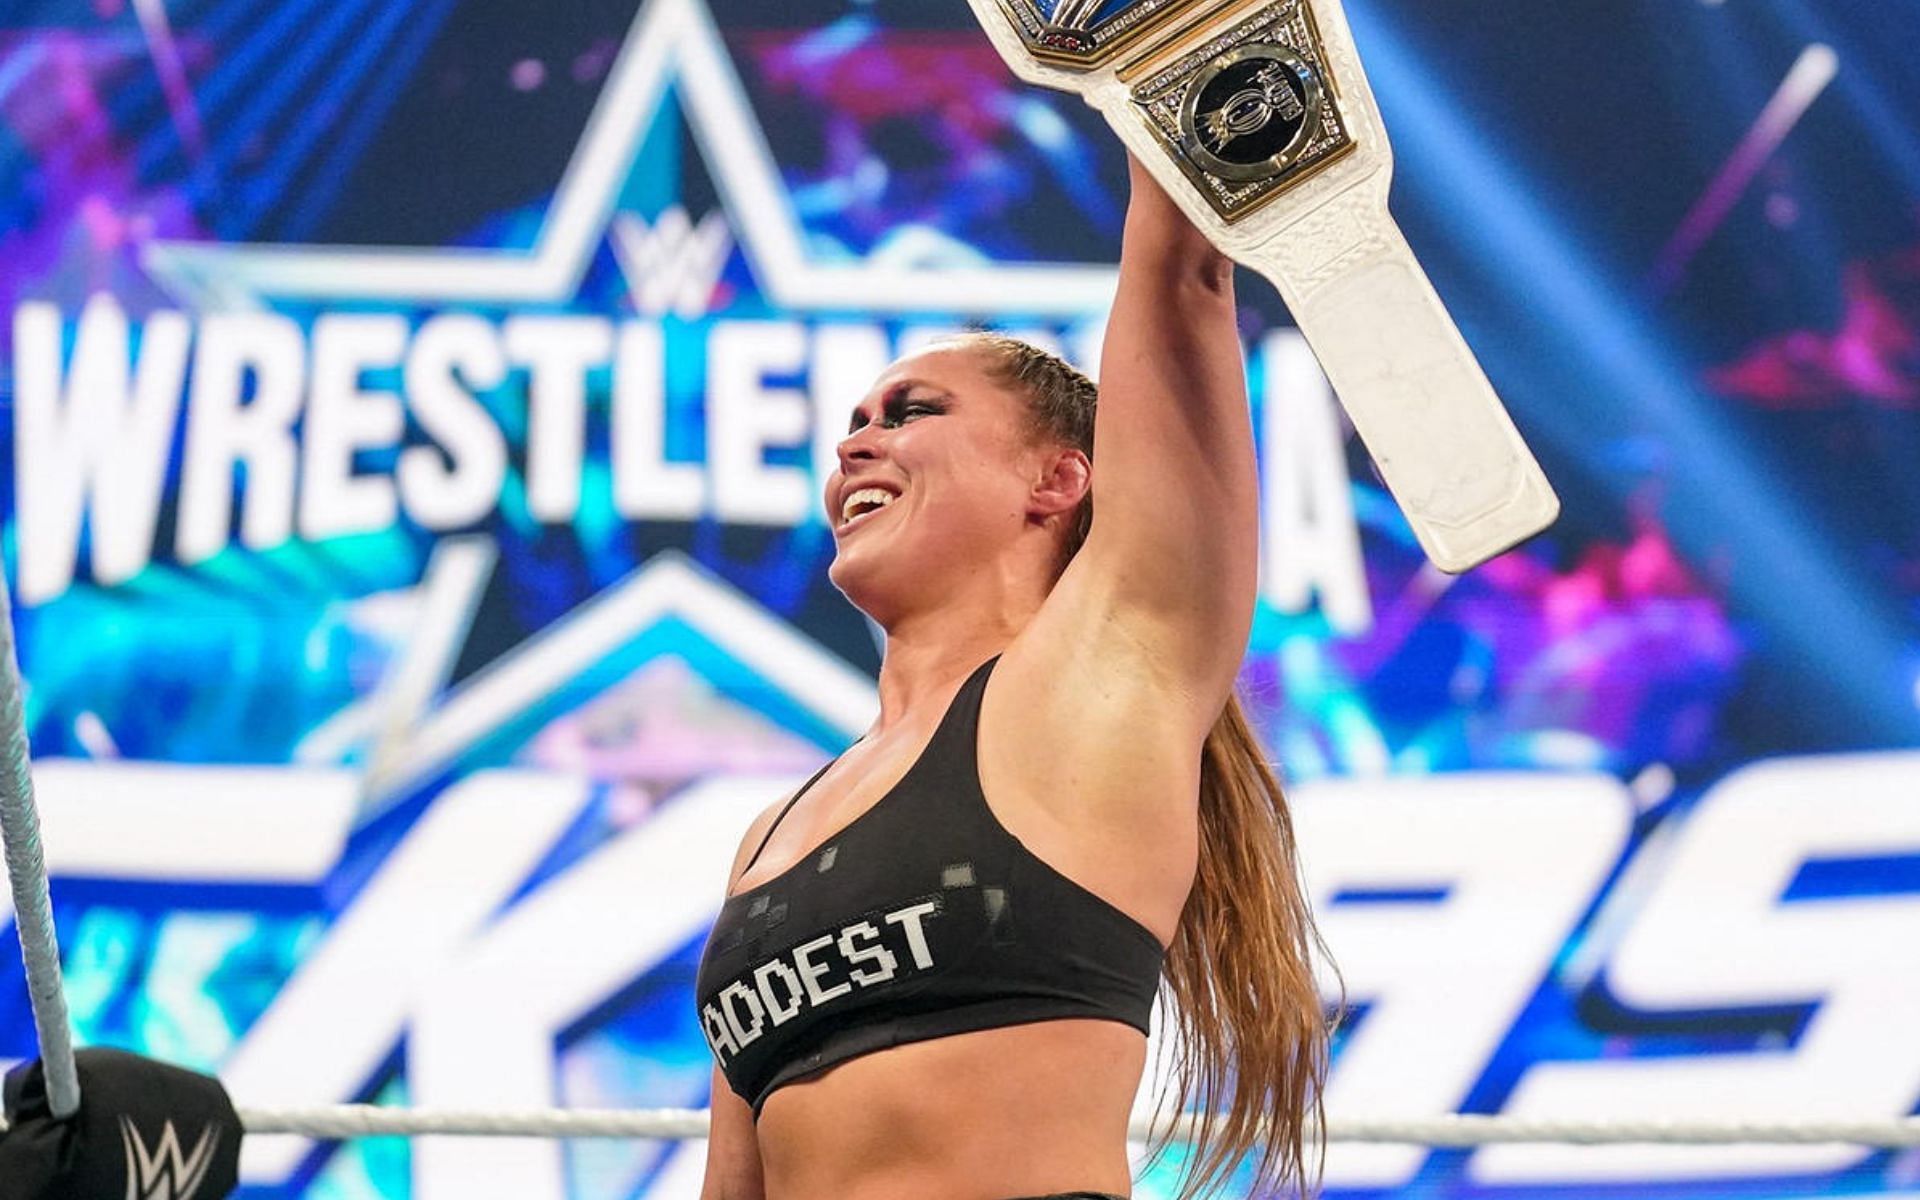 Ronda Rousey is a 2-time SmackDown Women